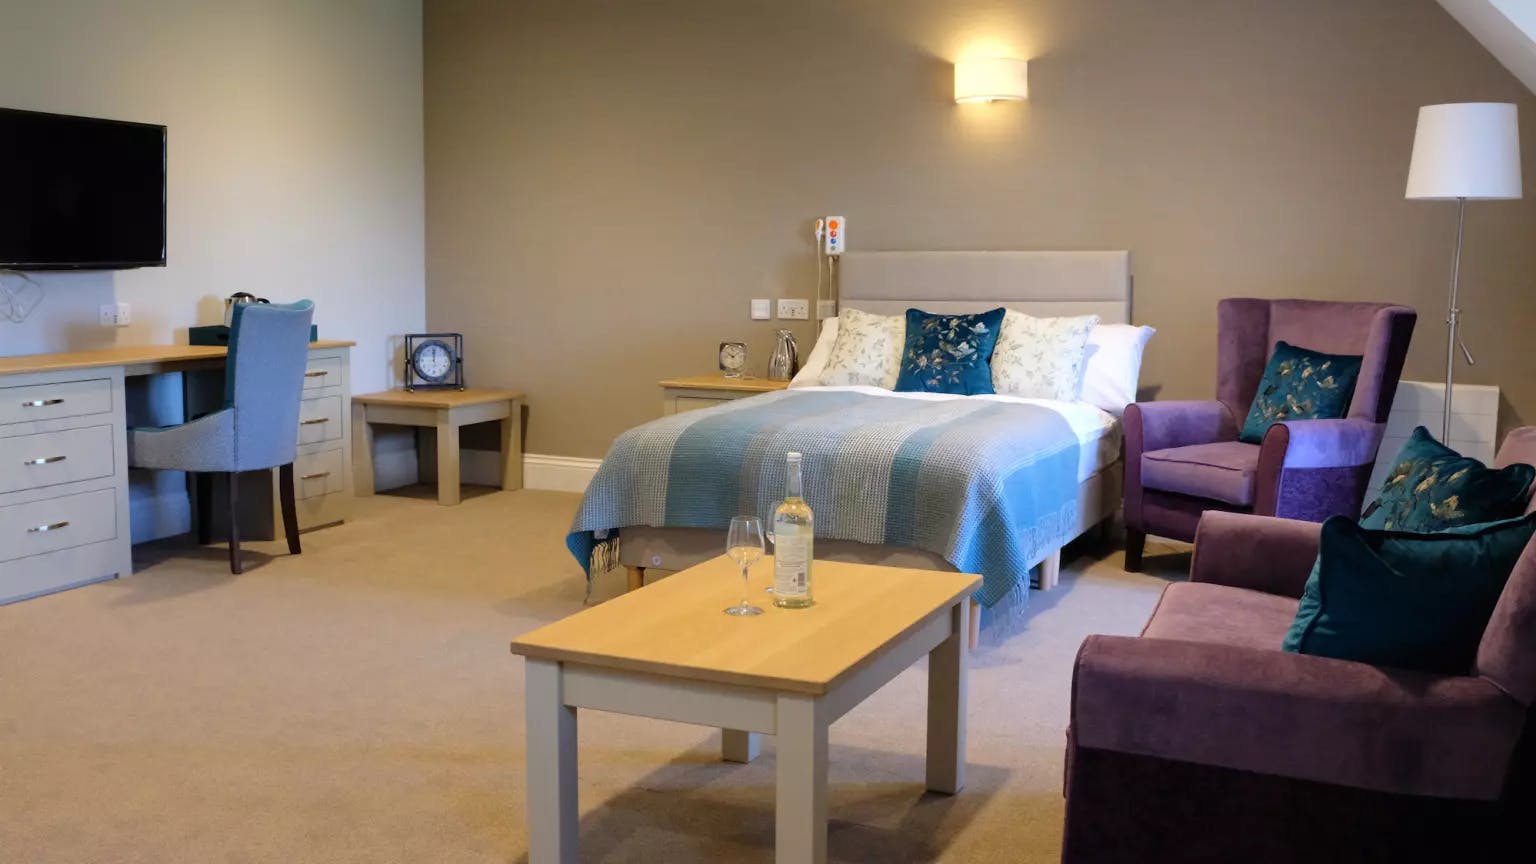 Bedroom of Mantels Court care home in Biggleswade, Bedfordshire